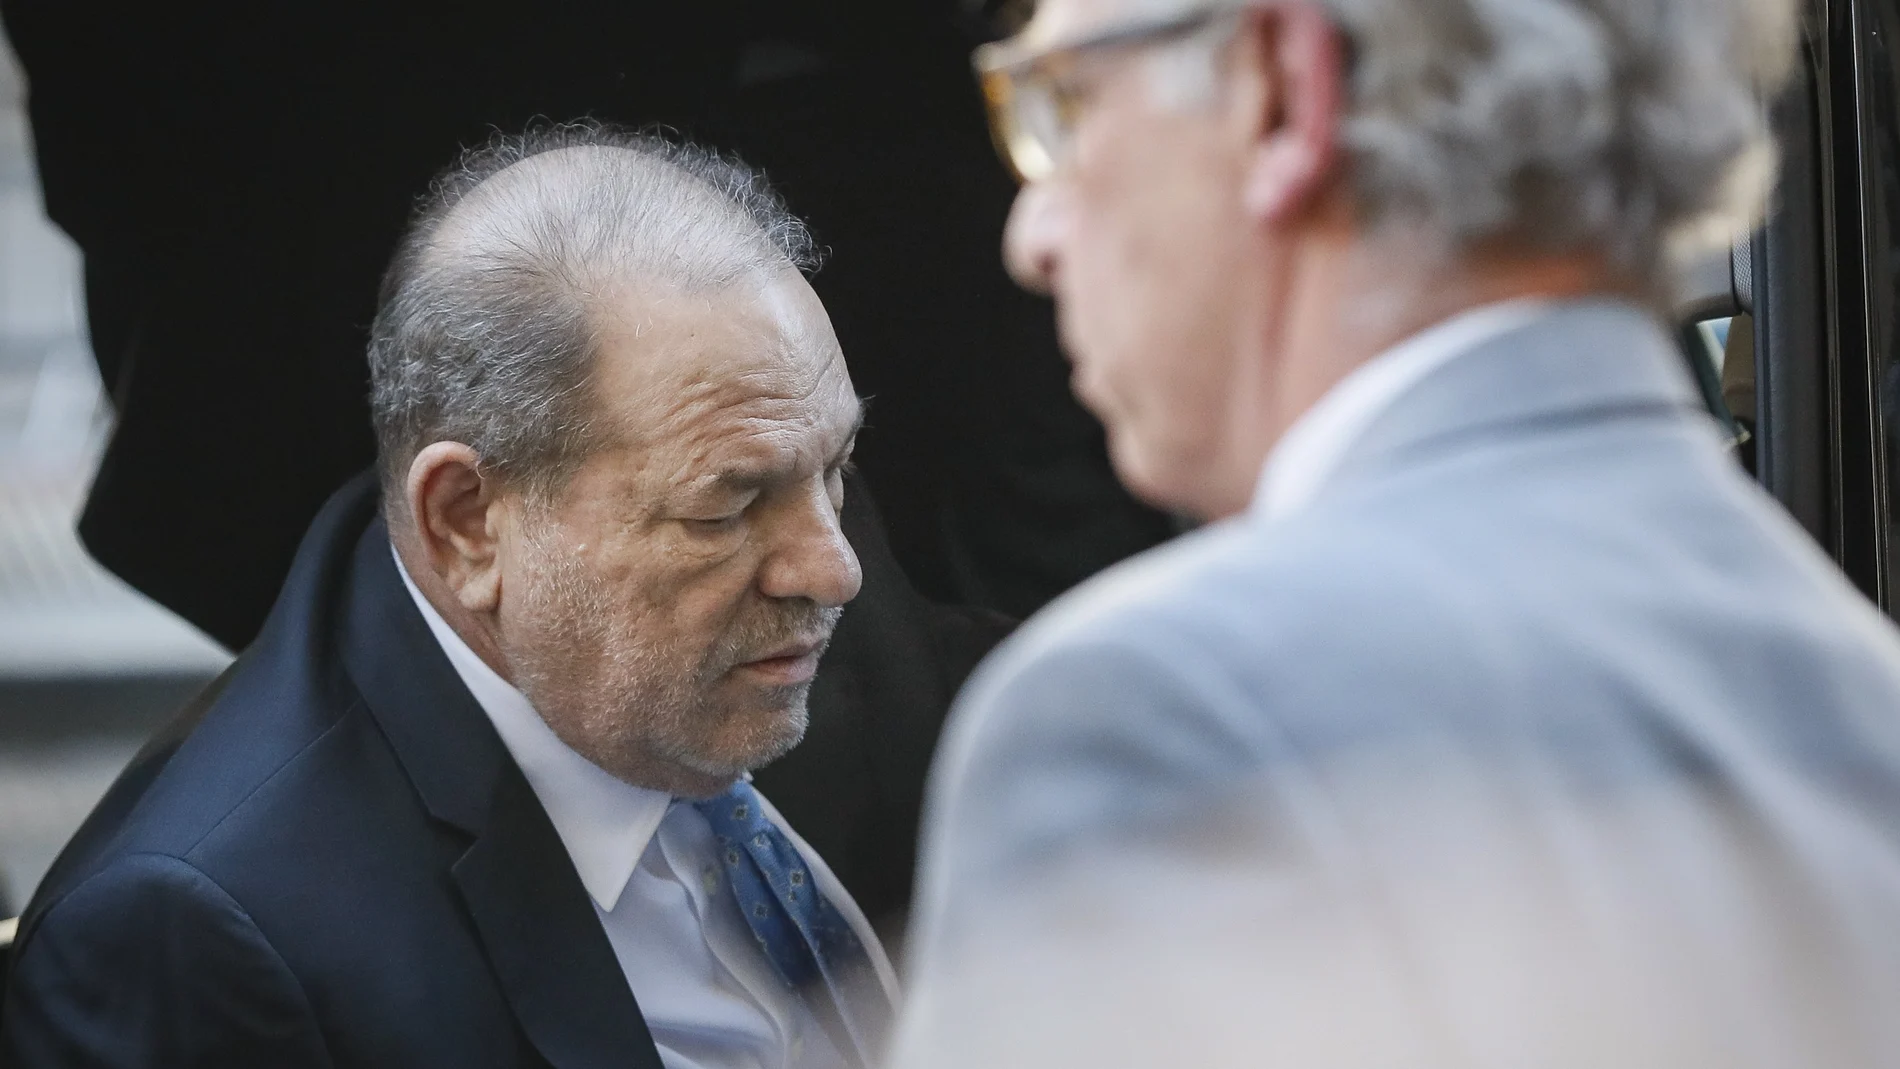 Harvey Weinstein arrives at a Manhattan courthouse for his rape trial, Monday, Feb. 24, 2020, in New York. A jury convicted the Hollywood mogul of rape and sexual assault. The jury found him not guilty of the most serious charge, predatory sexual assault, which could have resulted in a life sentence. (AP Photo/John Minchillo)